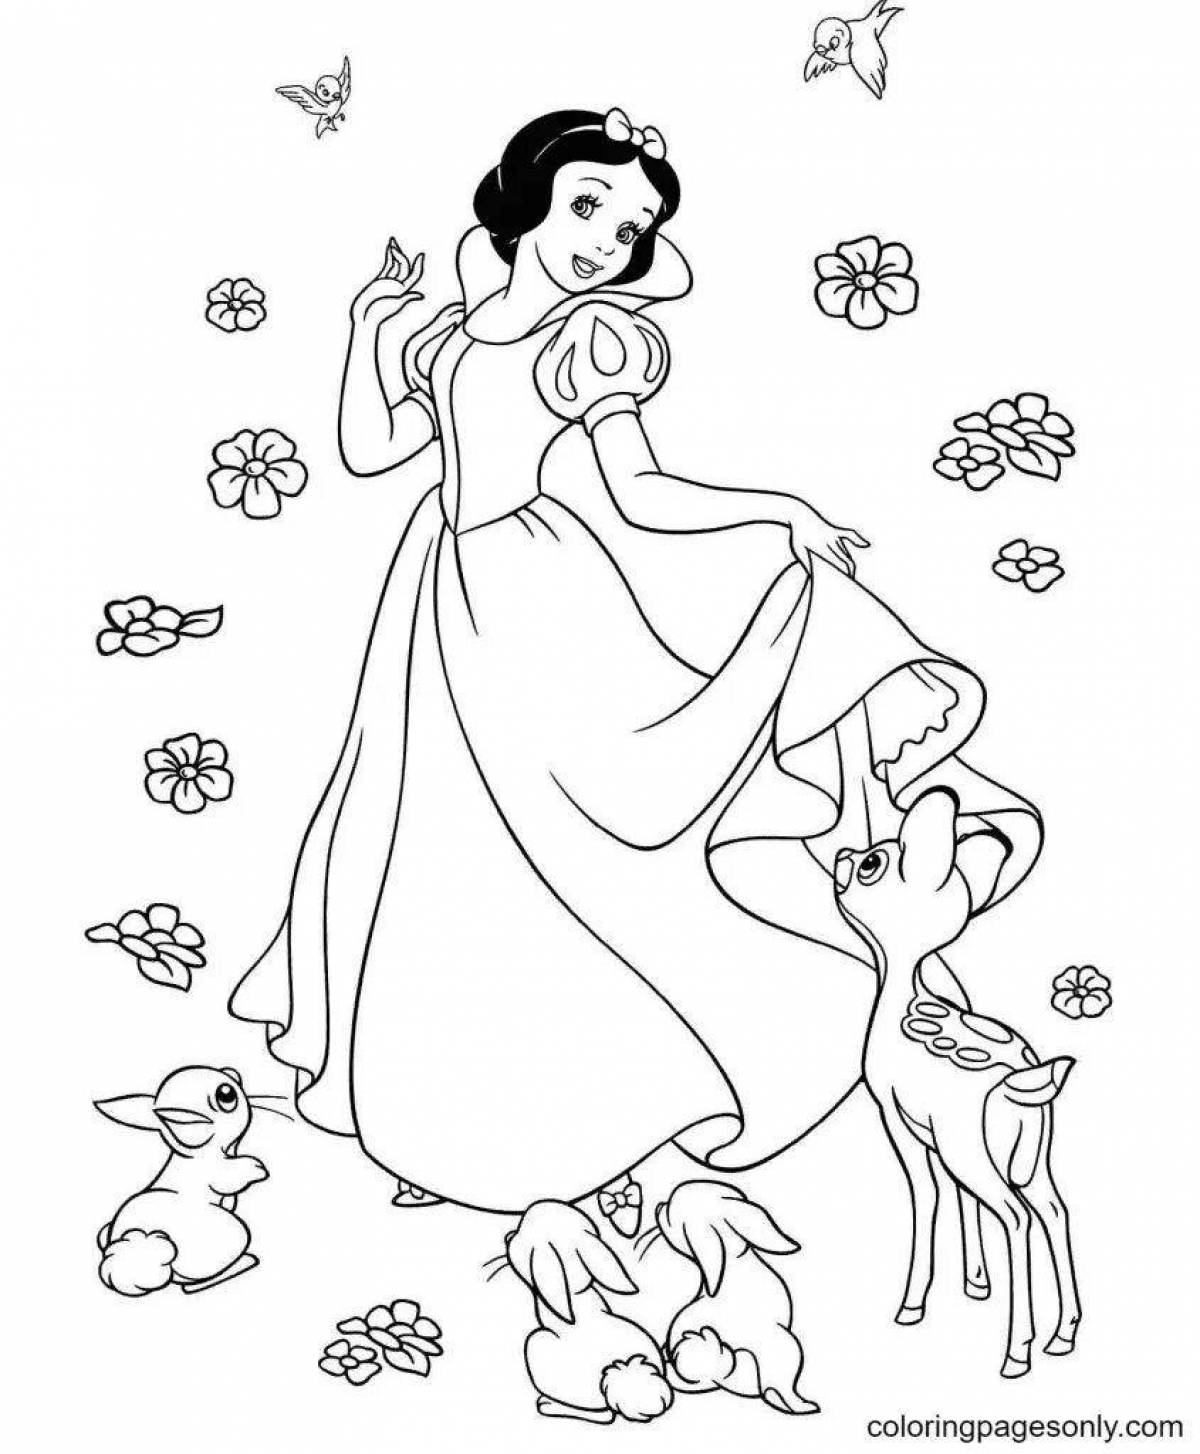 Fun coloring pages with little princesses